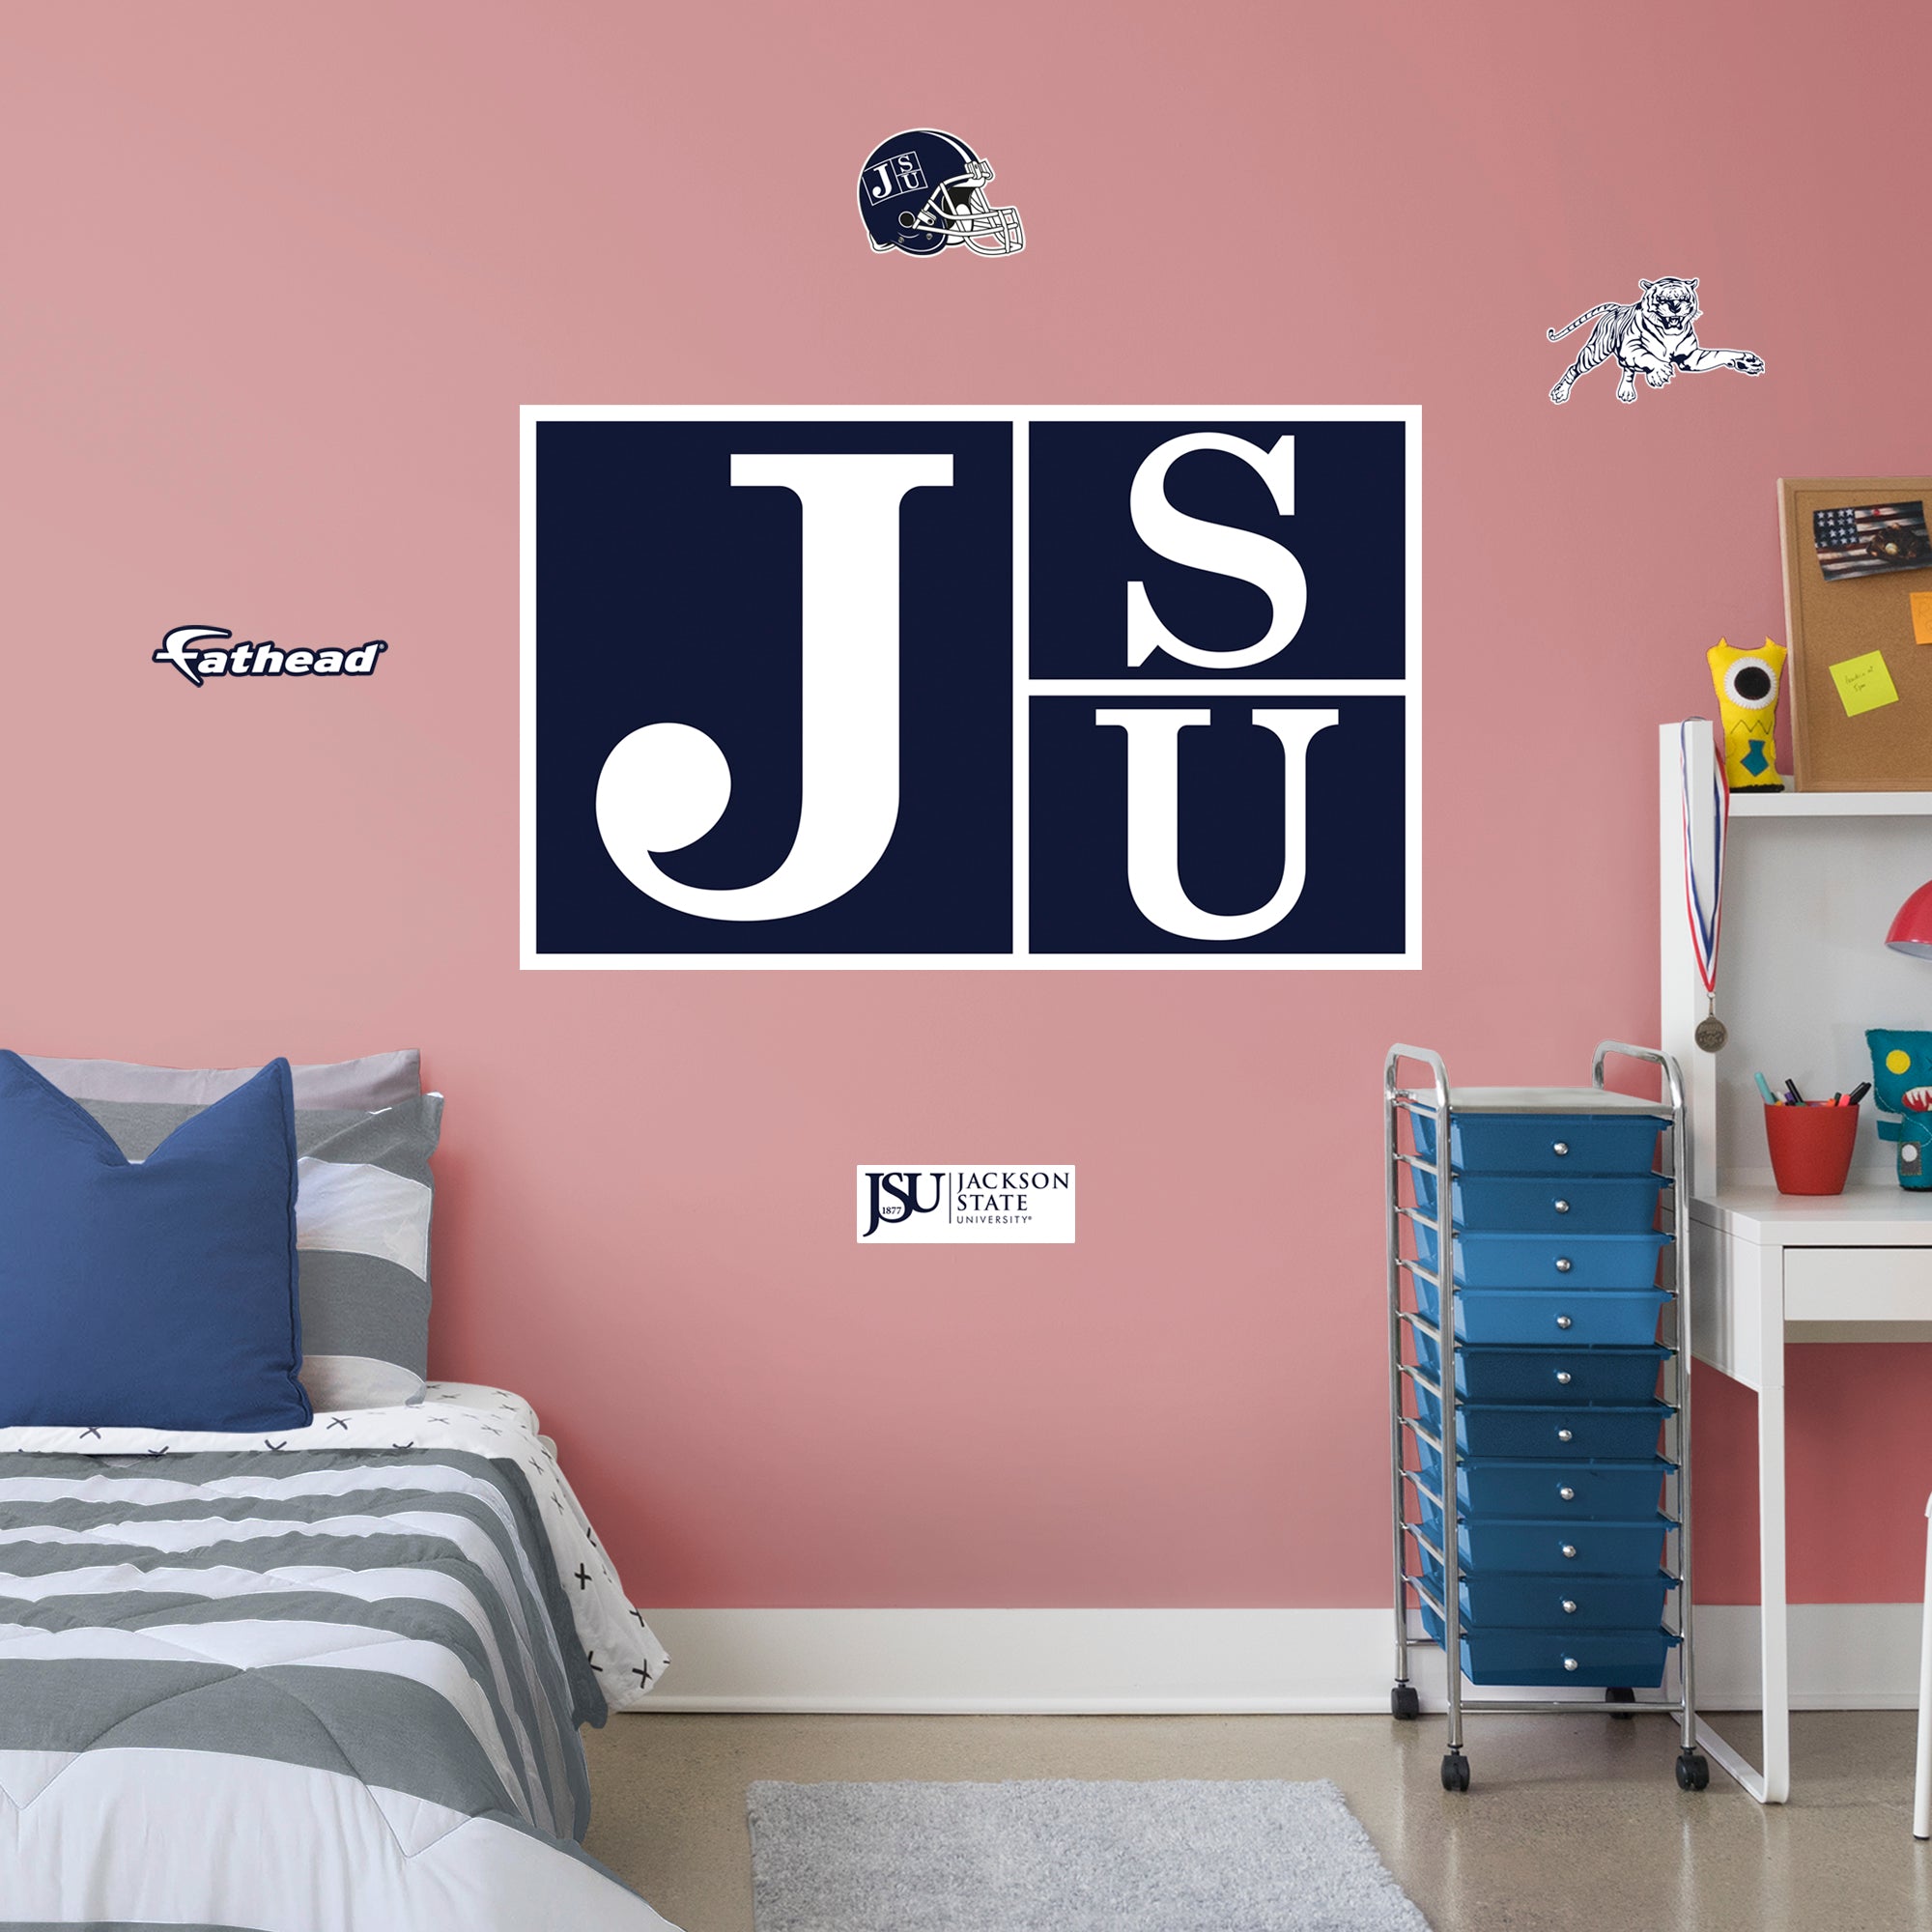 Jackson State University 2020 RealBig - Officially Licensed NCAA Removable Wall Decal Giant Decal (31"W x 50"H) by Fathead | Vin